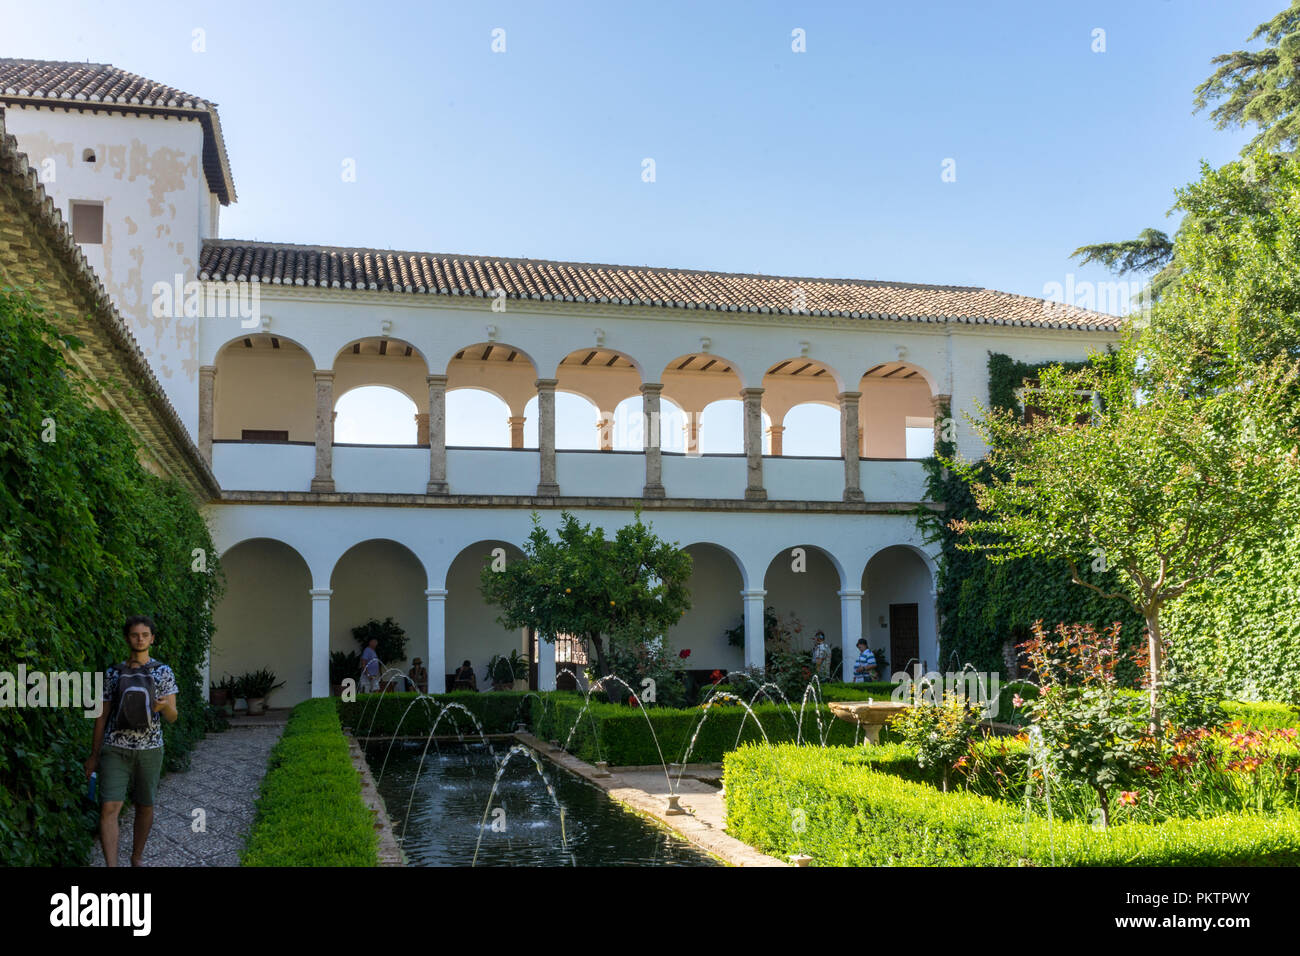 Granada, Spain - 23 June 2017: View of The Generalife courtyard, with its famous fountain in Alhambra Stock Photo